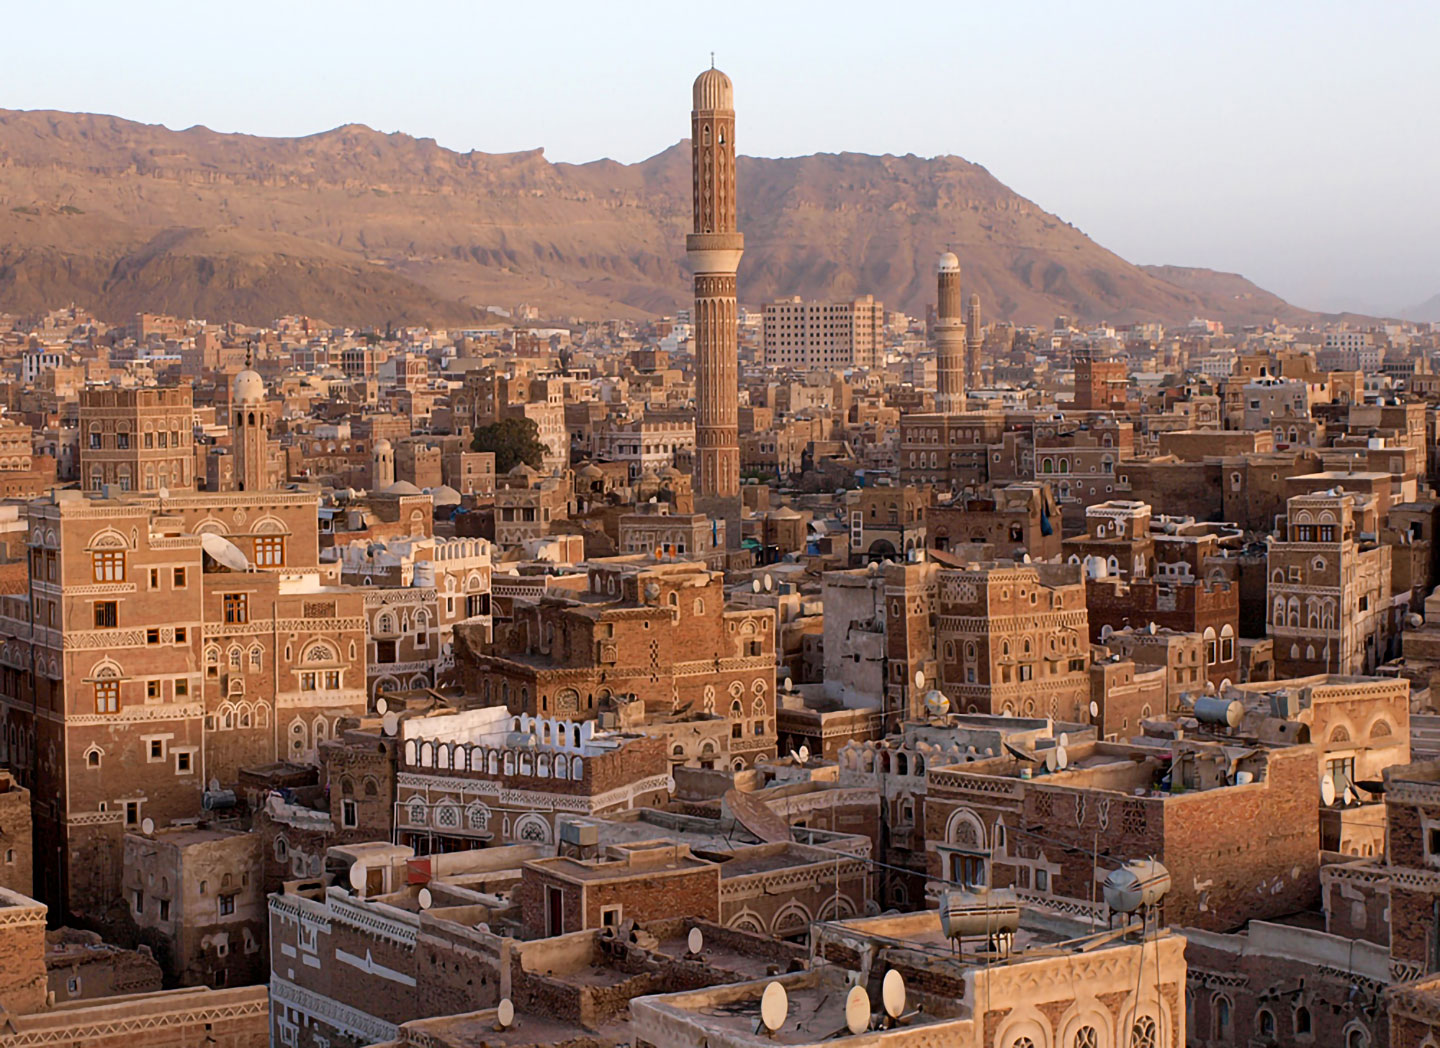 Typical architecture in the old town of Sanaa, the capital of Yemen.